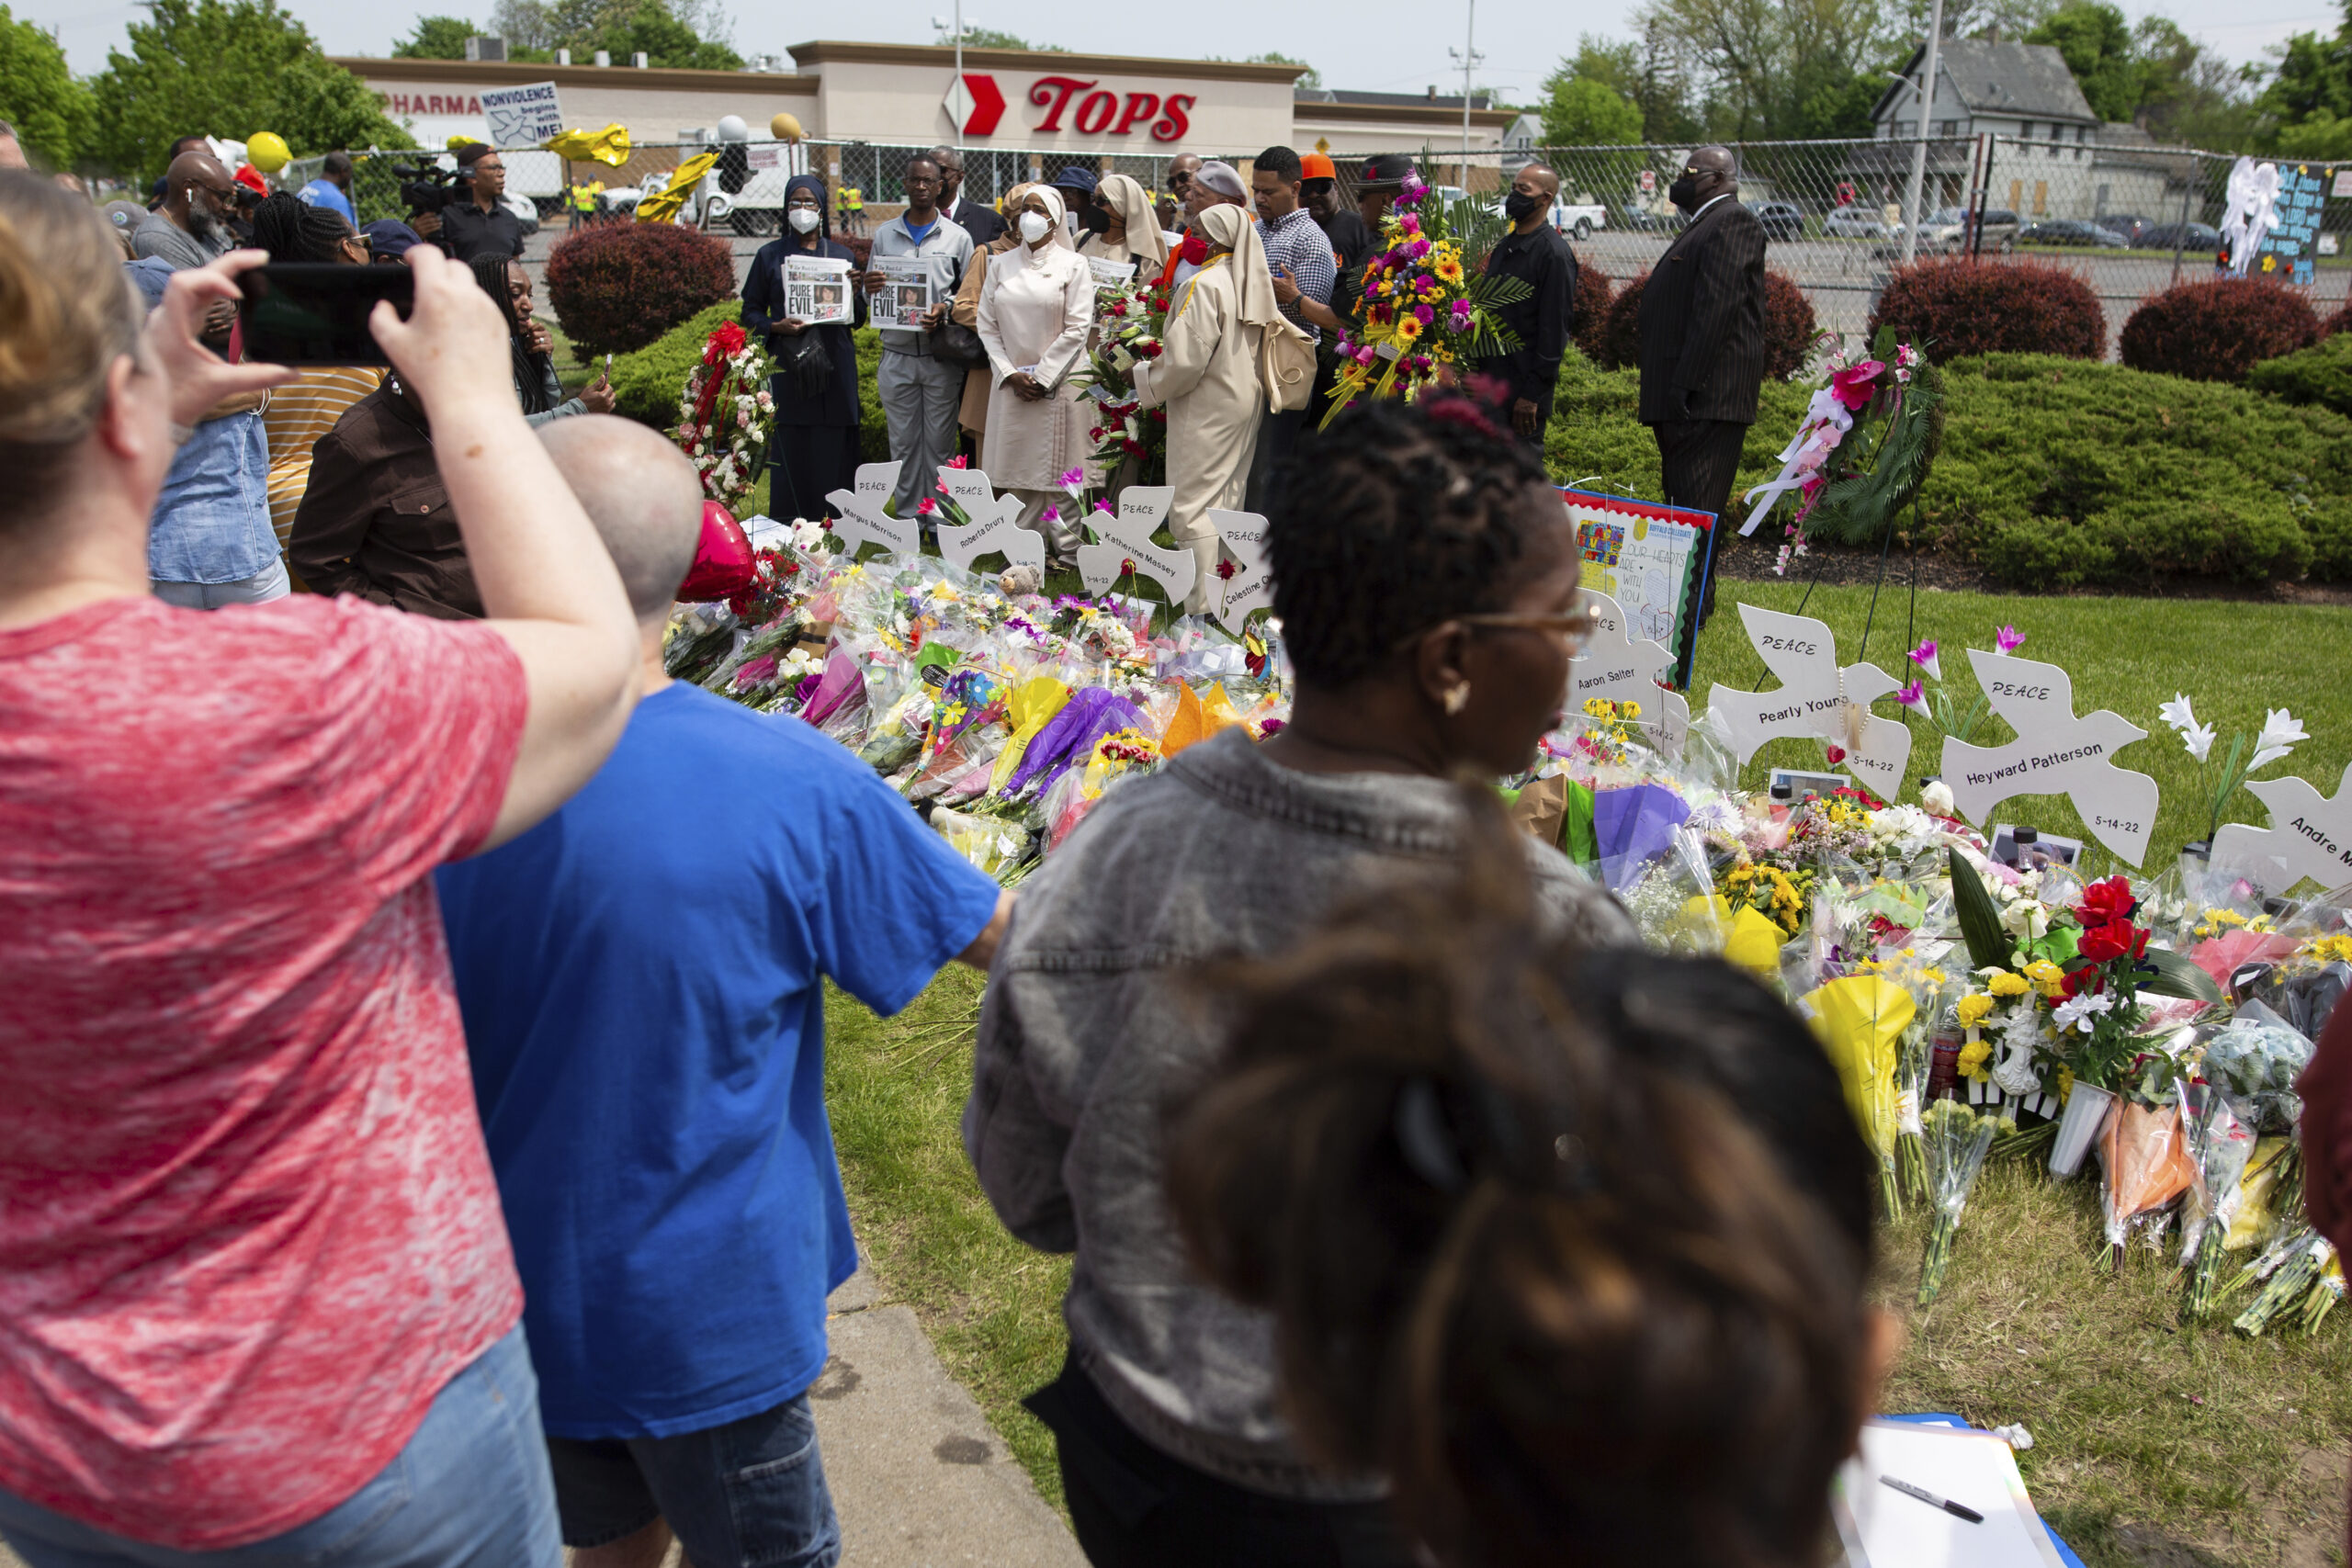 People gather around a memorial for the victims of the Buffalo supermarket shooting outside the Tops Friendly Market on Saturday, May 21, 2022, in Buffalo, N.Y. Tops was encouraging people to join its stores in a moment of silence to honor the shooting victims Saturday at 2:30 p.m., the approximate time of the attack a week earlier. Buffalo Mayor Byron Brown also called for 123 seconds of silence from 2:28 p.m. to 2:31 p.m., followed by the ringing of church bells 13 times throughout the city to honor the 10 people killed and three wounded. Photo credit: Joshua Bessex, The Associated Press